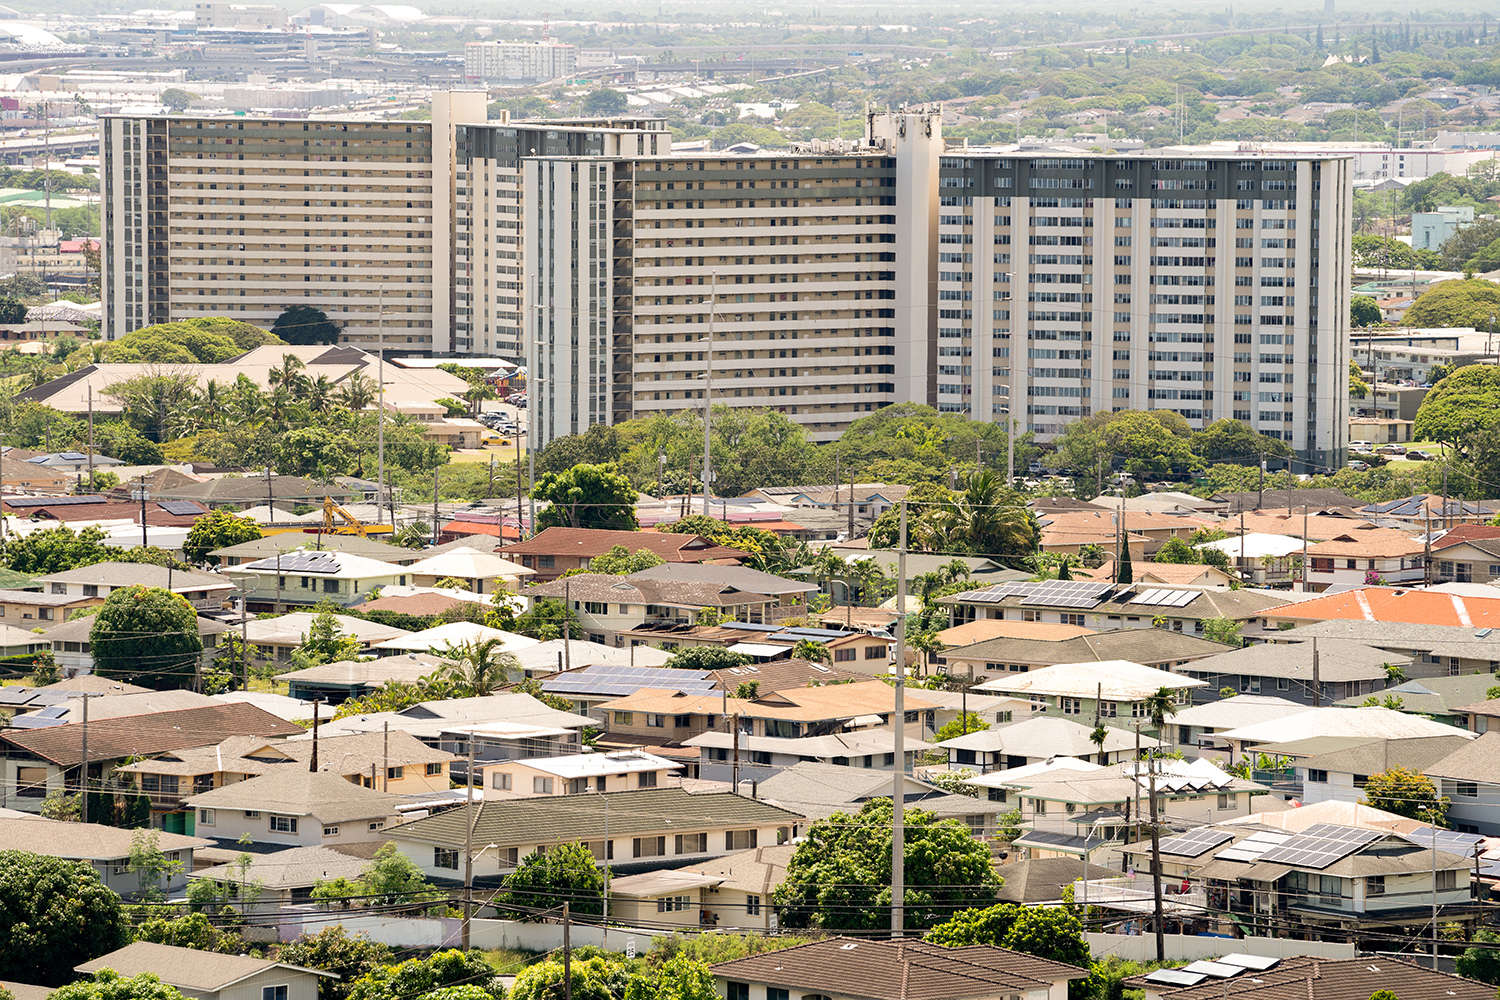 Two high-rise buildings are shown in the background with private homes surrounding them. 